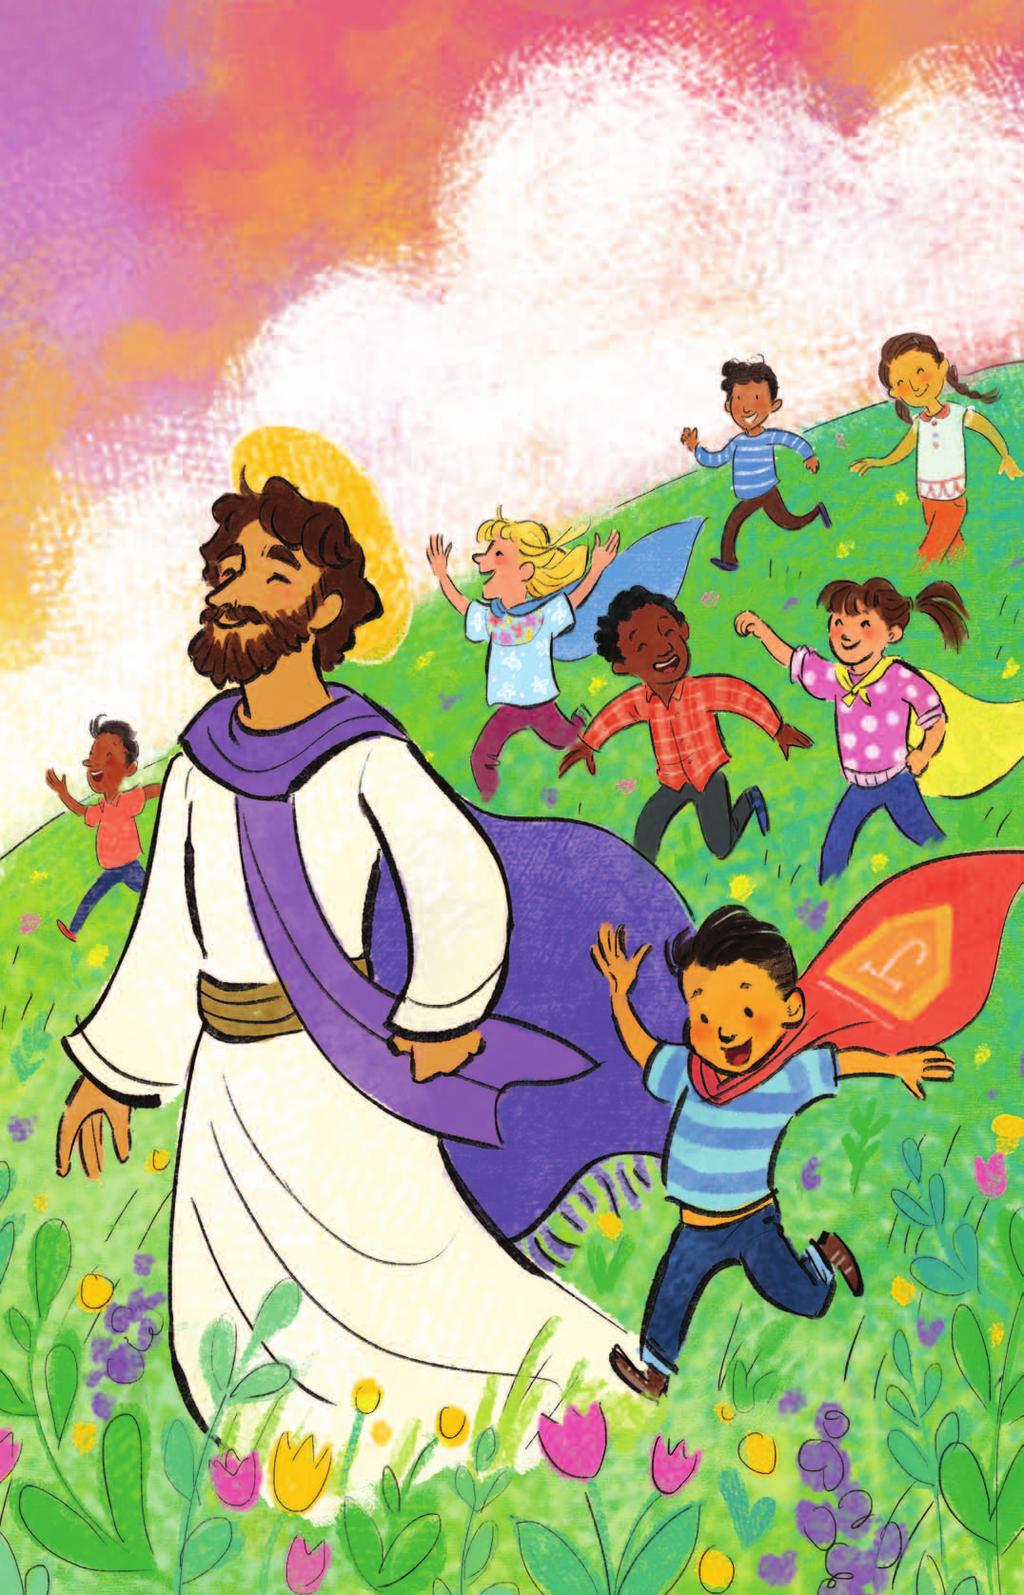 JESUS AND YOU HEROES IN LENT!